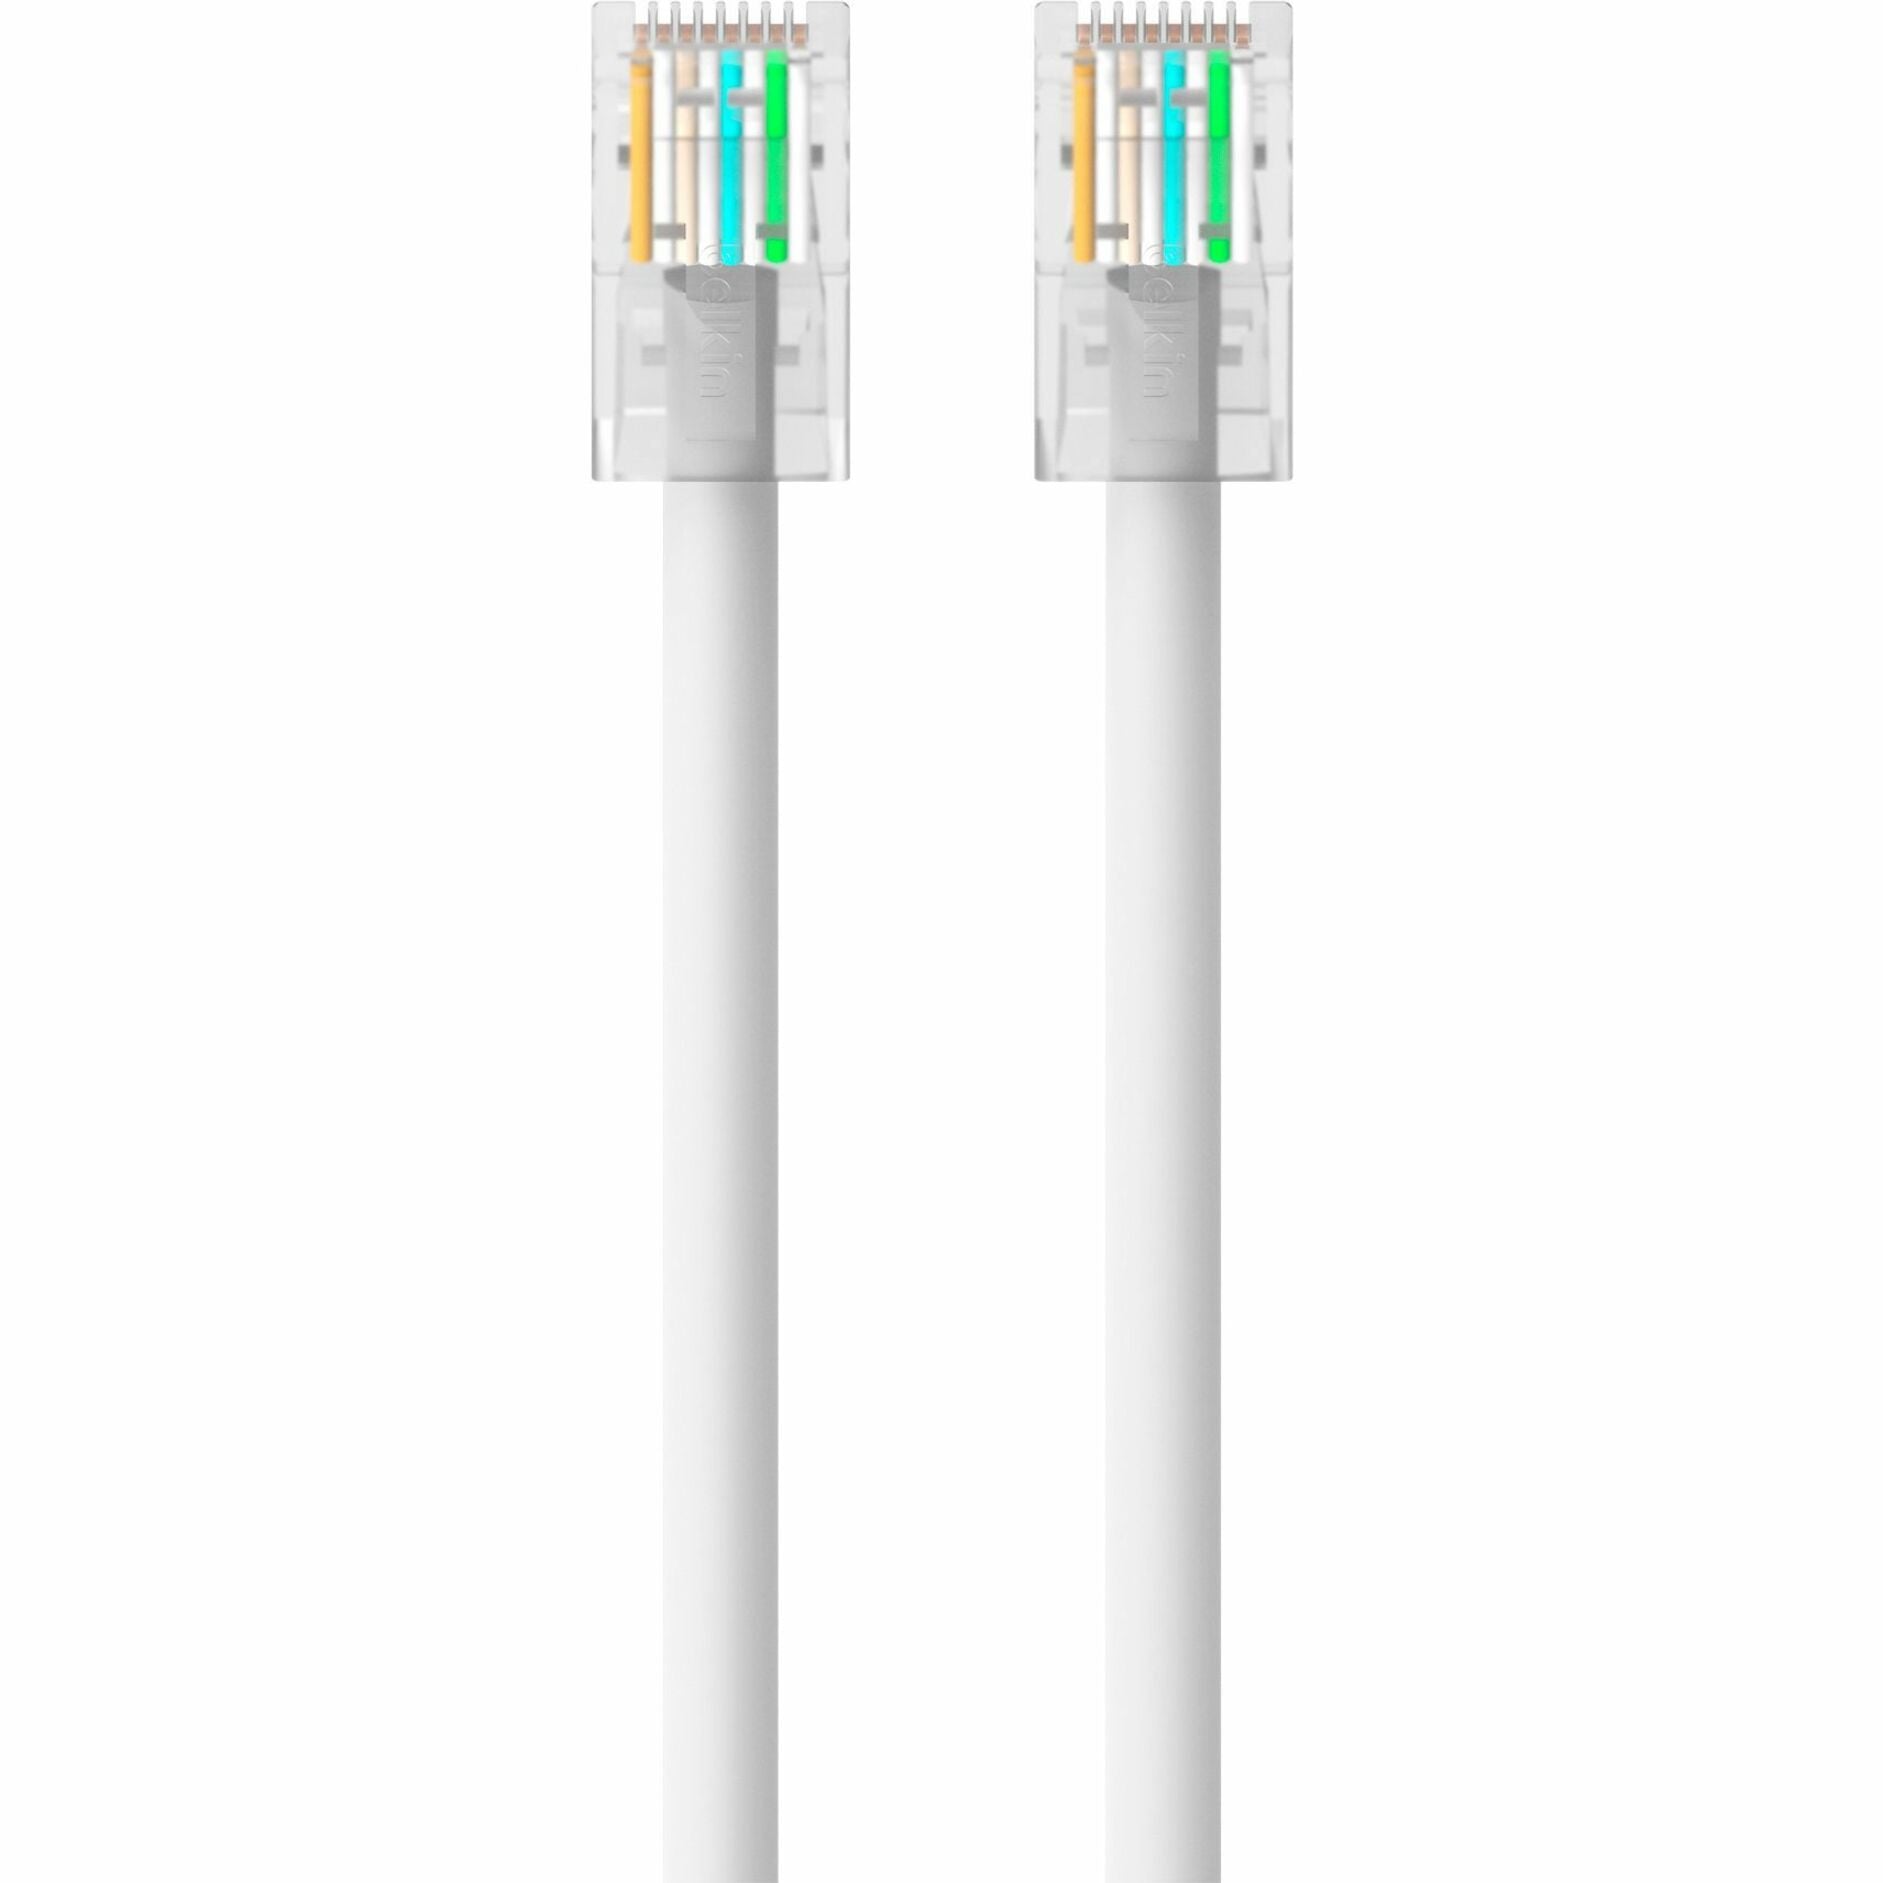 Belkin A3L791-03-WHT RJ45 Category 5e Patch Cable, 3 ft, Exceeds Performance Requirement